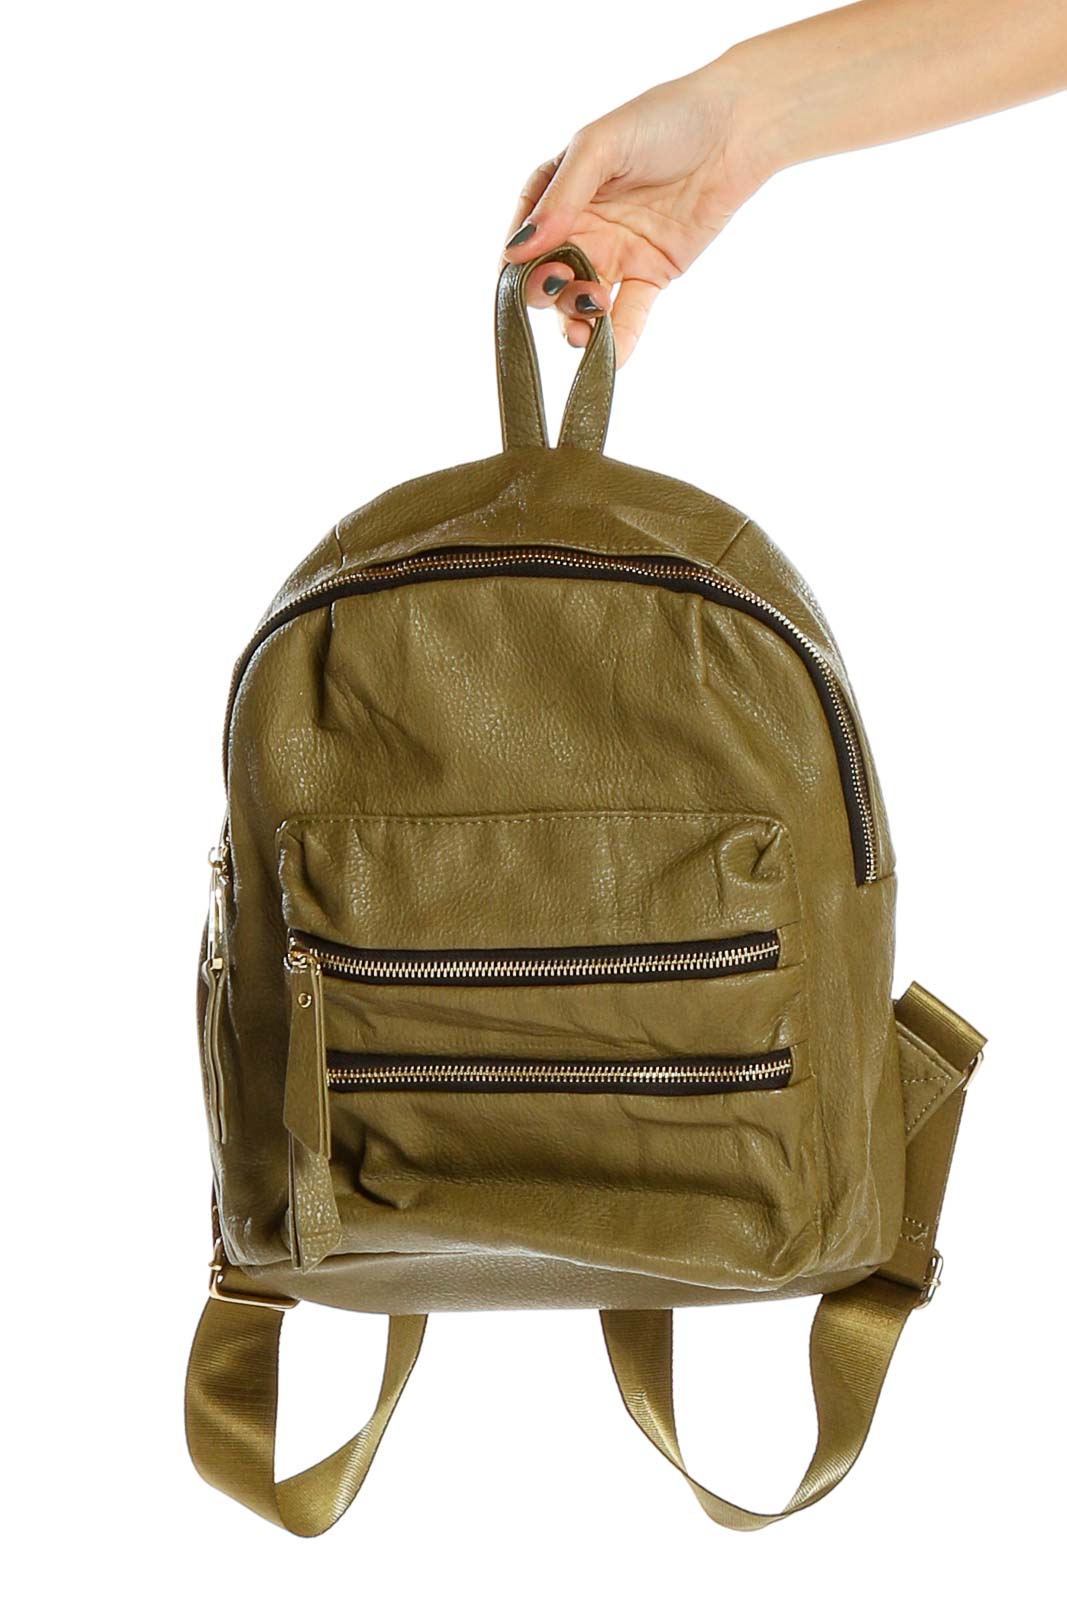 Green Pleather Backpack Front